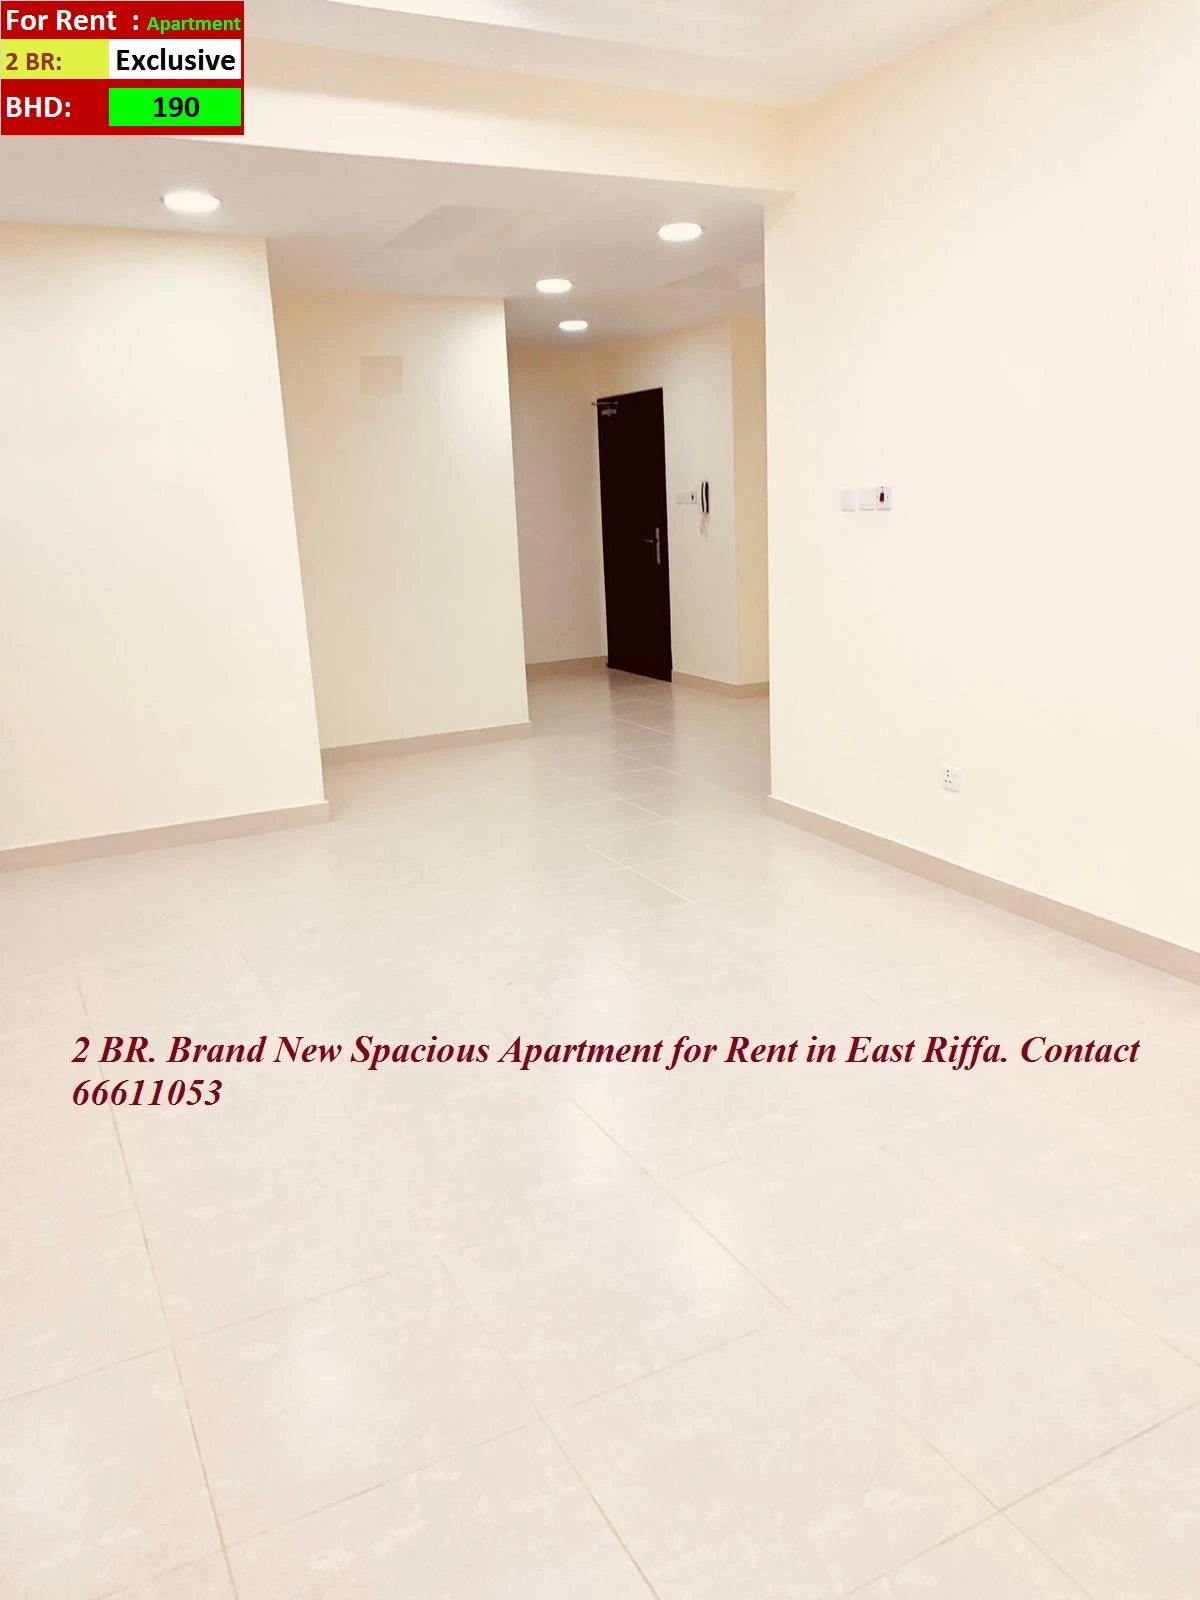 2 BR. Brand New Spacious Apartment for Rent in East Riffa